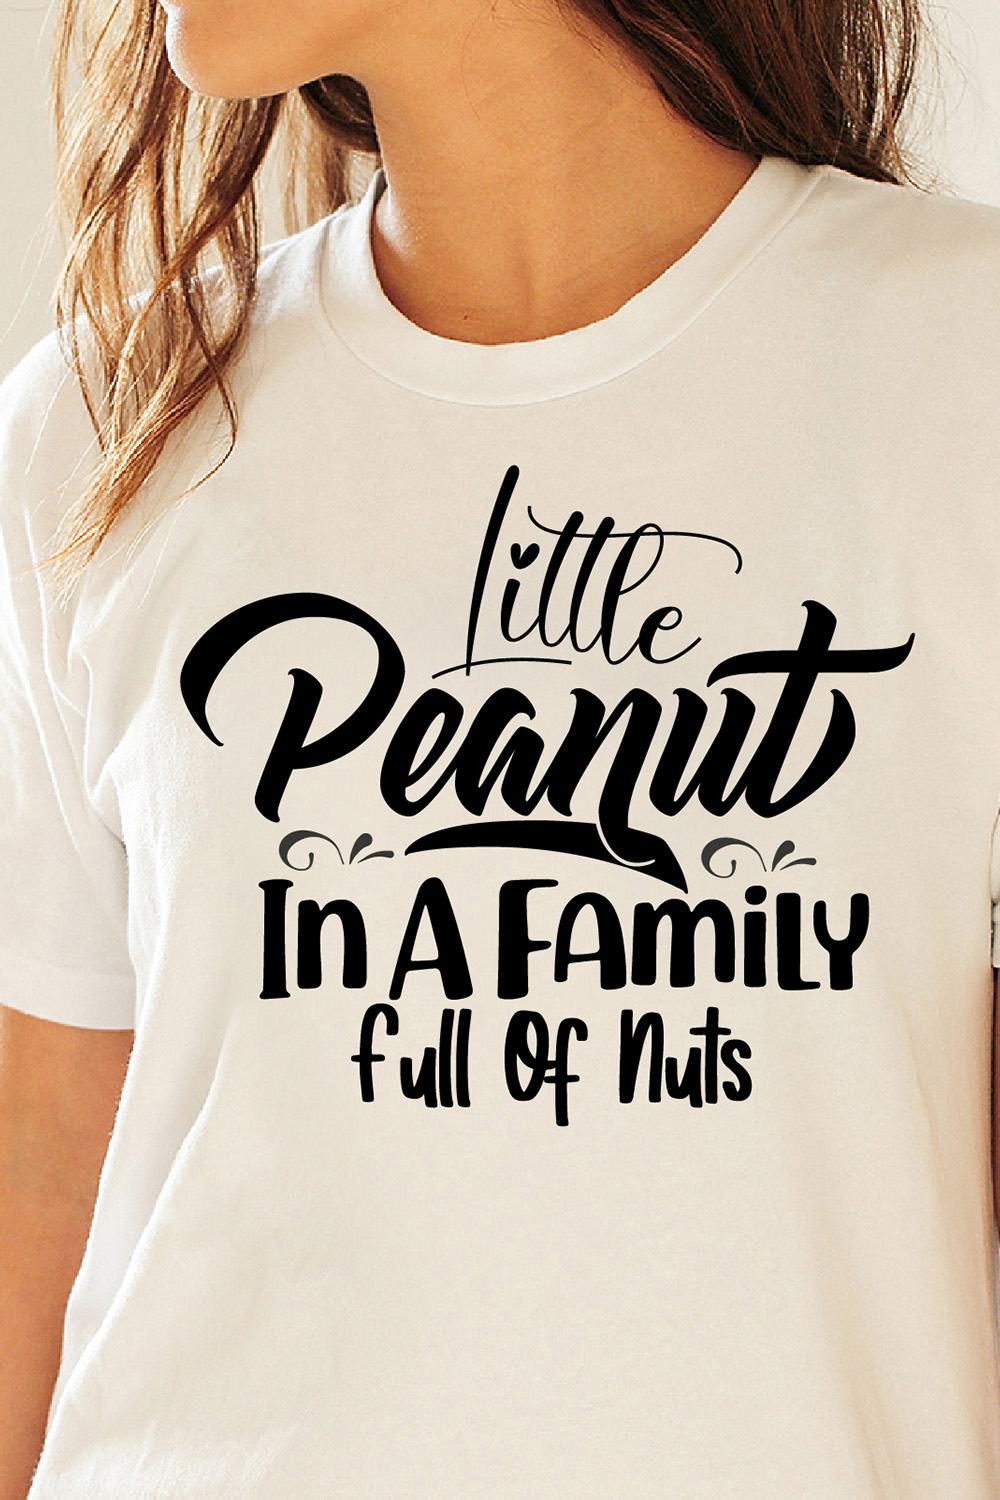 Image of a white t-shirt with enchanting black lettering Little Peanut In A Family Full Of Nuts.